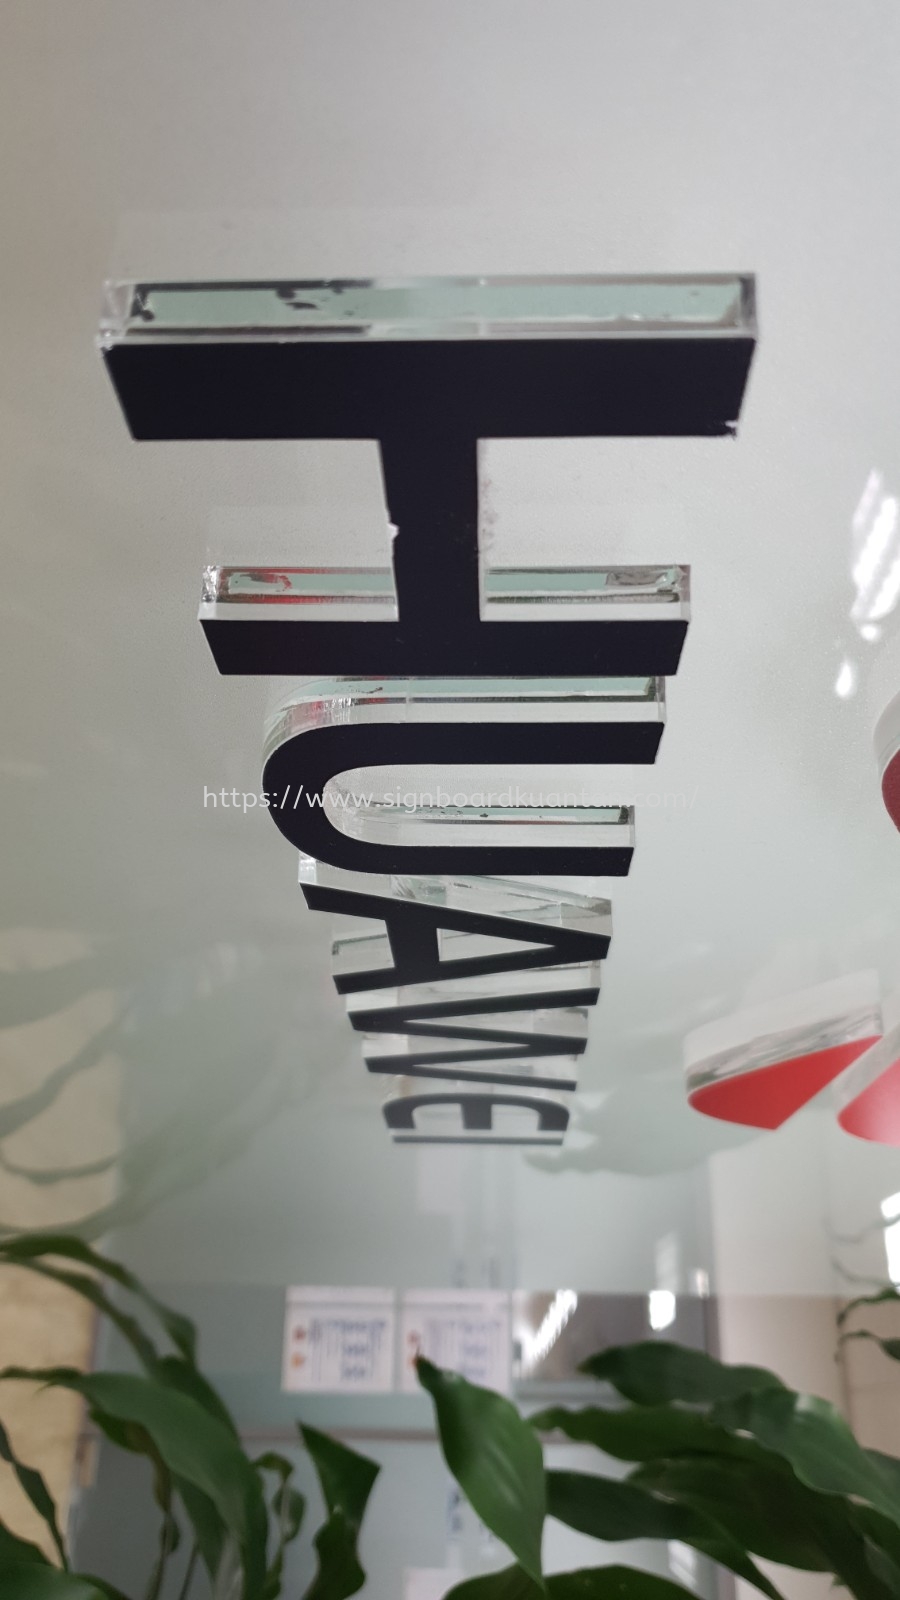 HUAWEI 3D ACRYLIC LETTERING-LASER CUT OUT LETTERING AT JELUTONG PENANG MALAYSIA